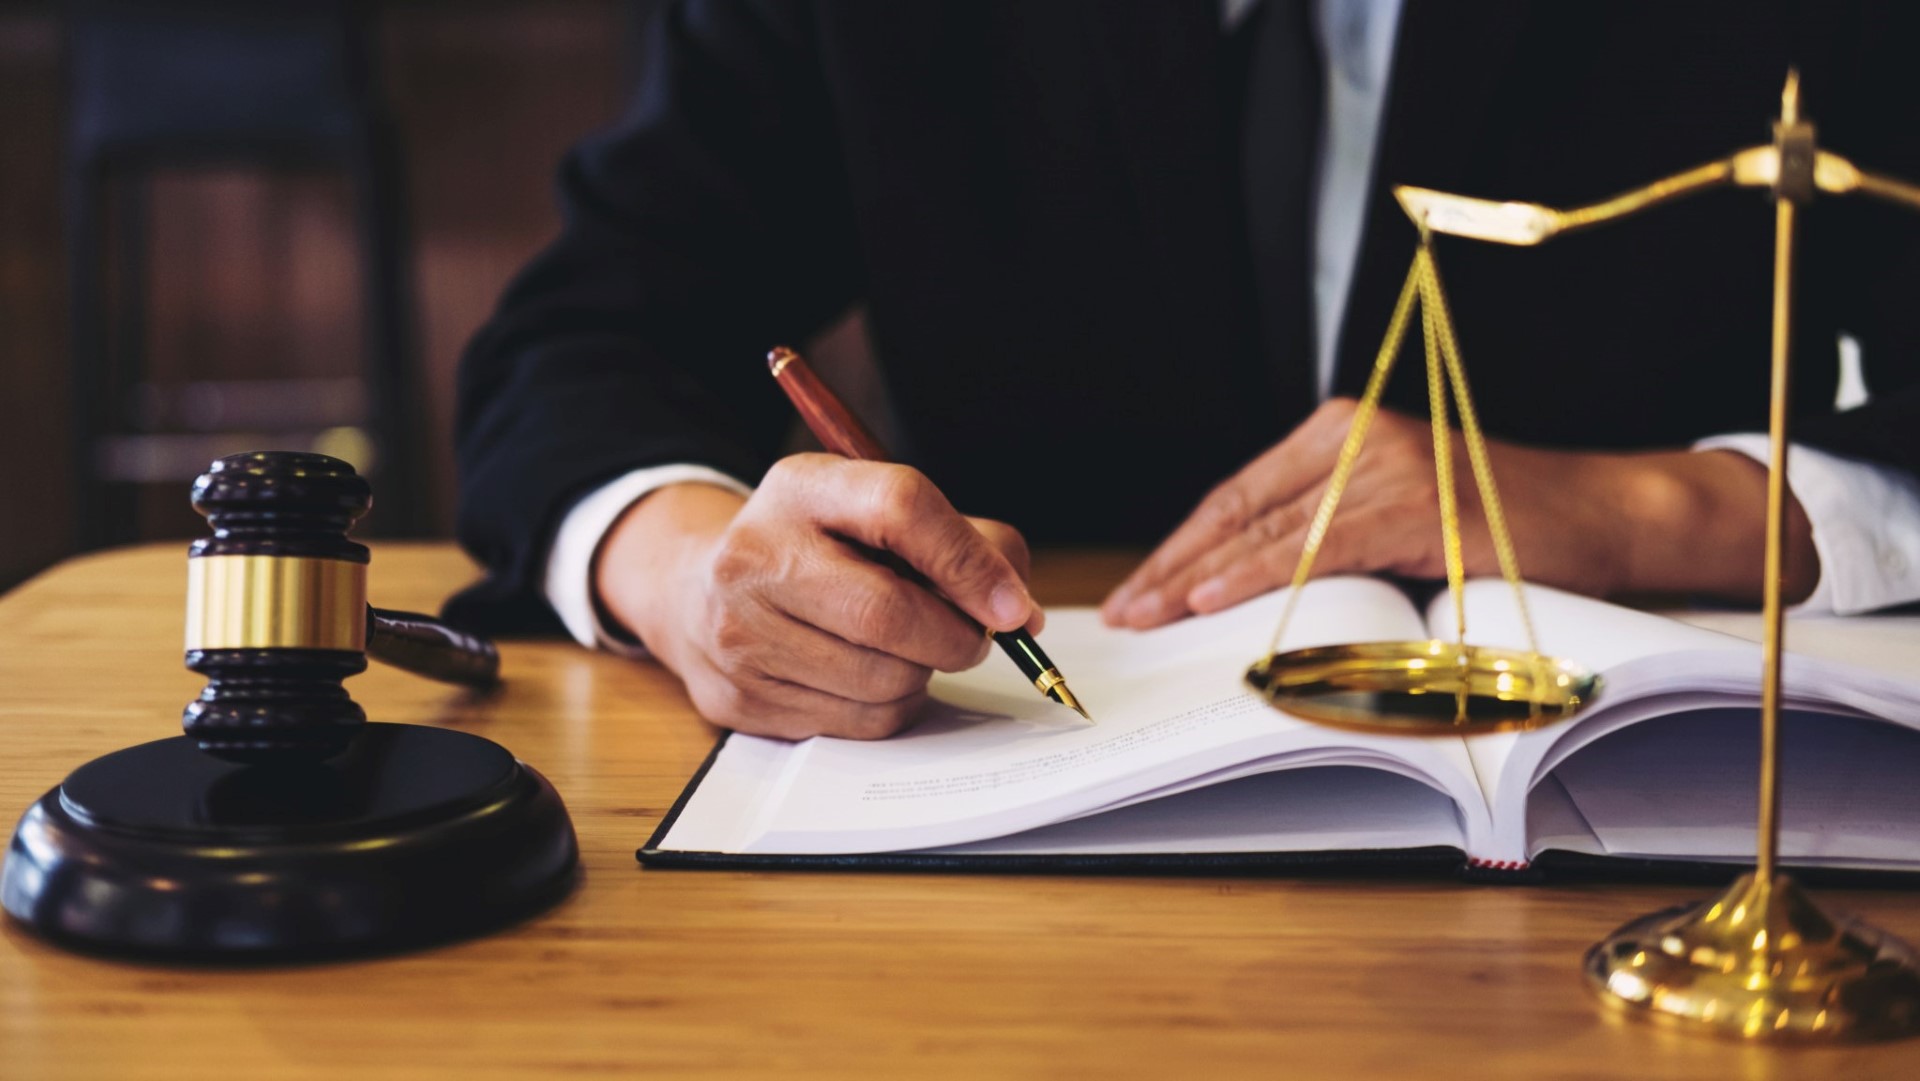 When Do I Need A Family Law Attorney?